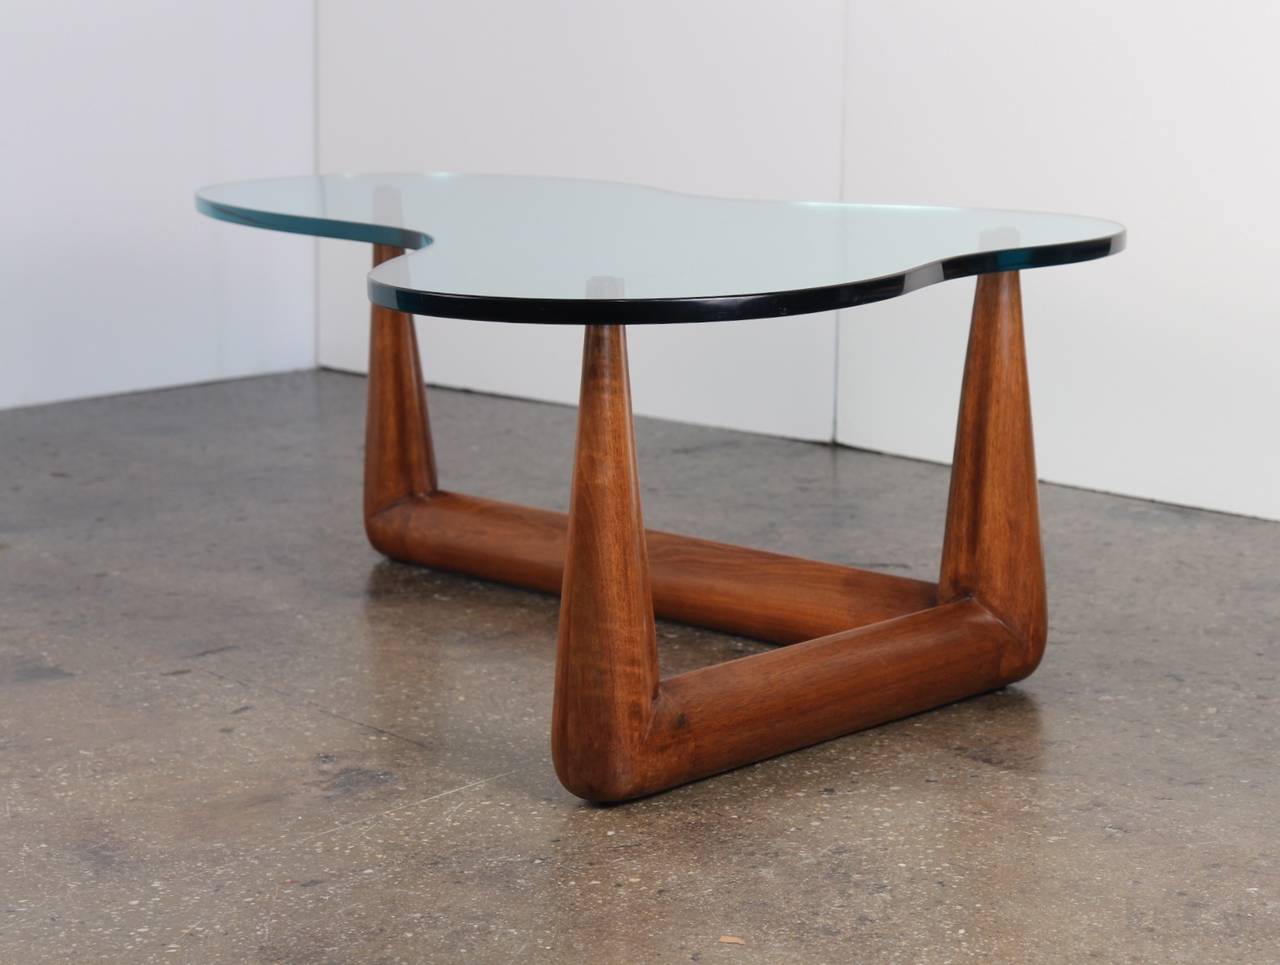 Incredible sculpted walnut base supports a biomorphic glass top in exquisite condition. The 5/8